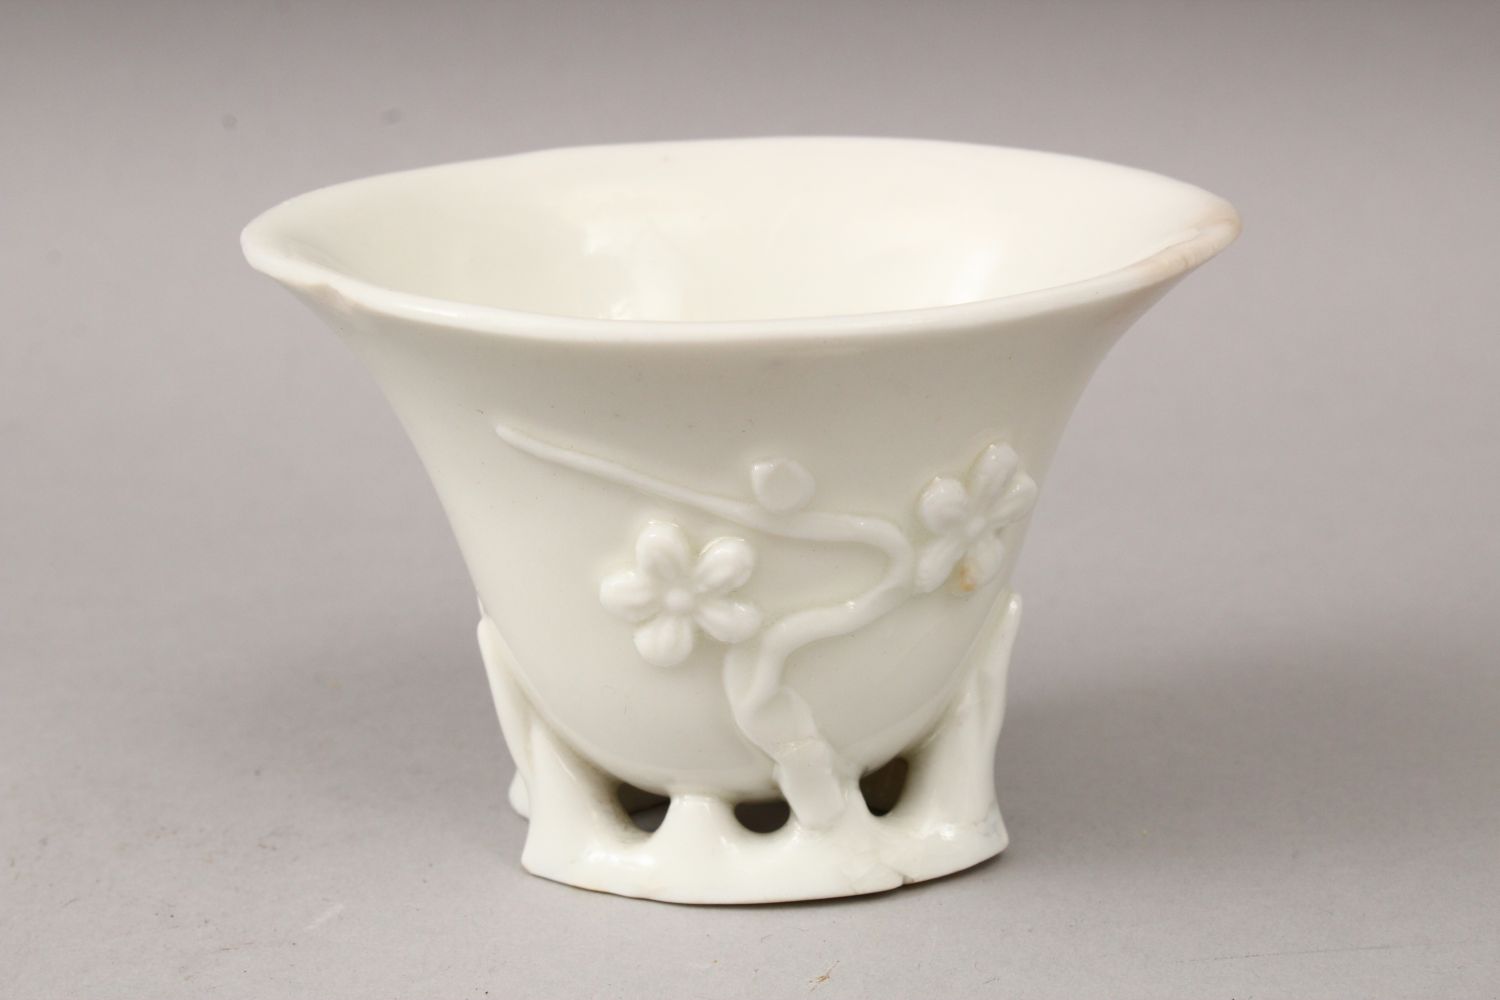 A 19TH CENTURY CHINESE BLANC DE CHINE PORCELAIN LIBATION CUP, with moulded relief decoration - Image 2 of 3